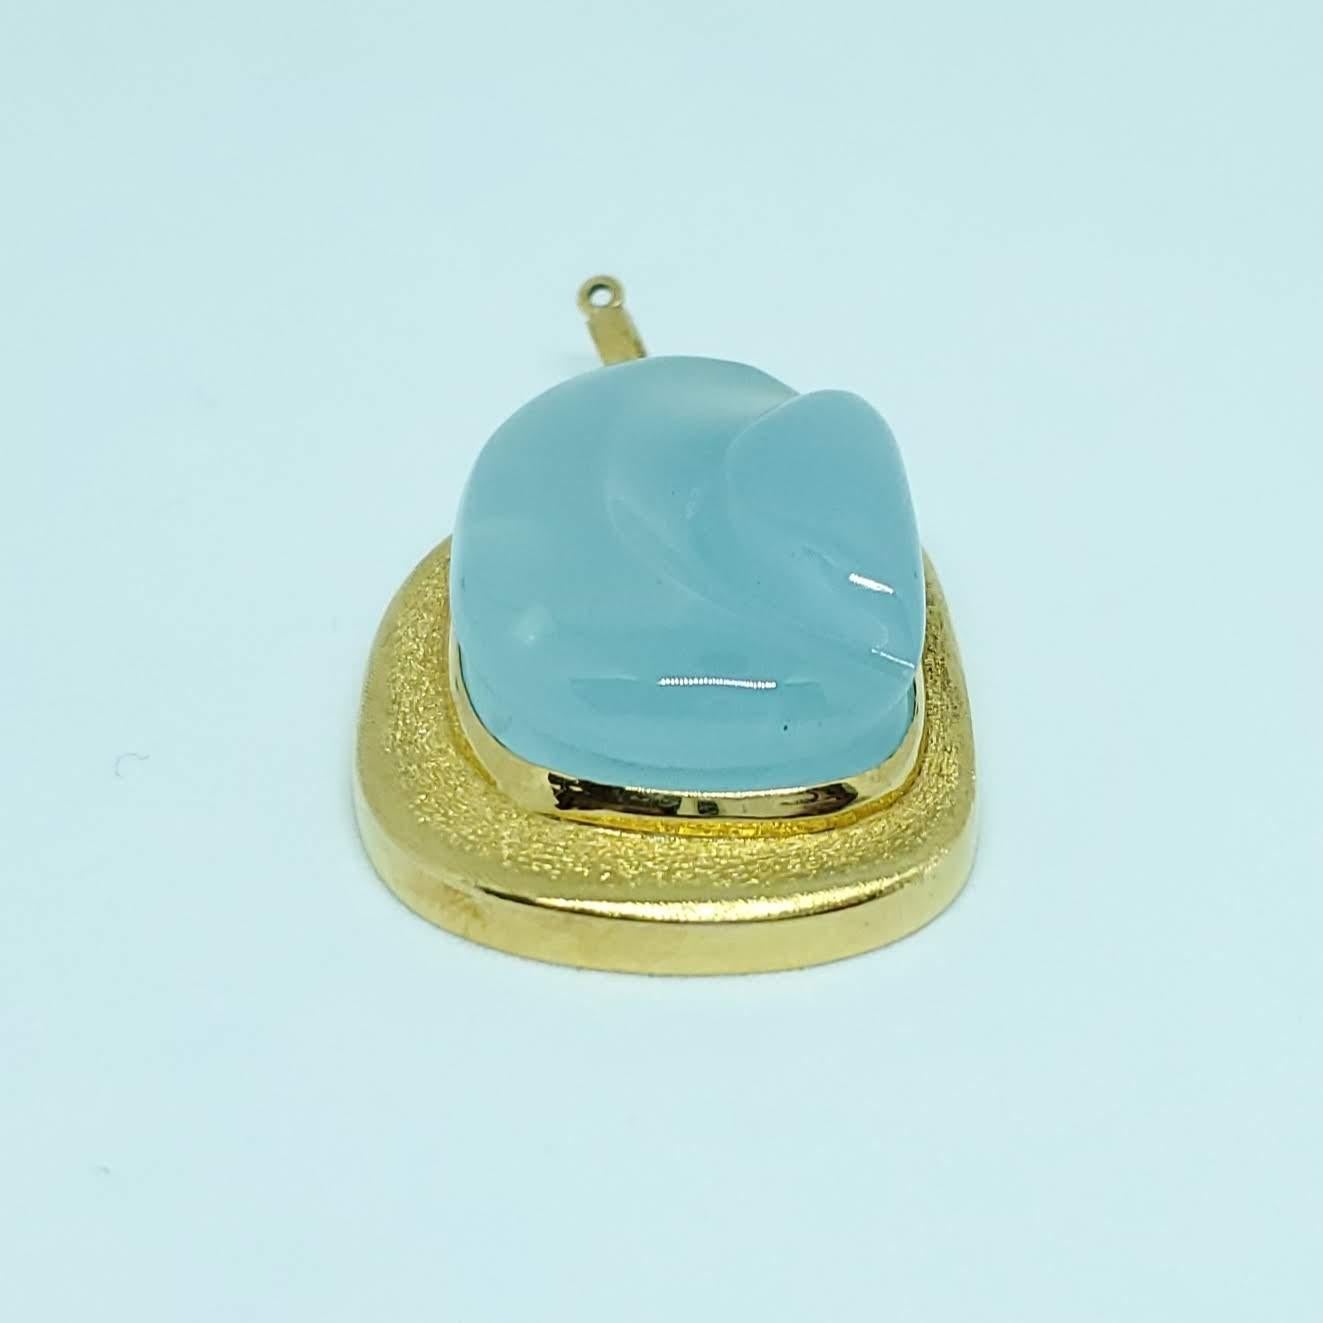 Thanks for taking a look at this Haroldo Burle Marx Free Form Aqua Pendant. This beautiful aquamarine is 48 carats and is surrounded by 18 Karat Gold. The face of the Stone is 1.16 inches by .80 inches. The overall size is 1.47 inches by 1.07